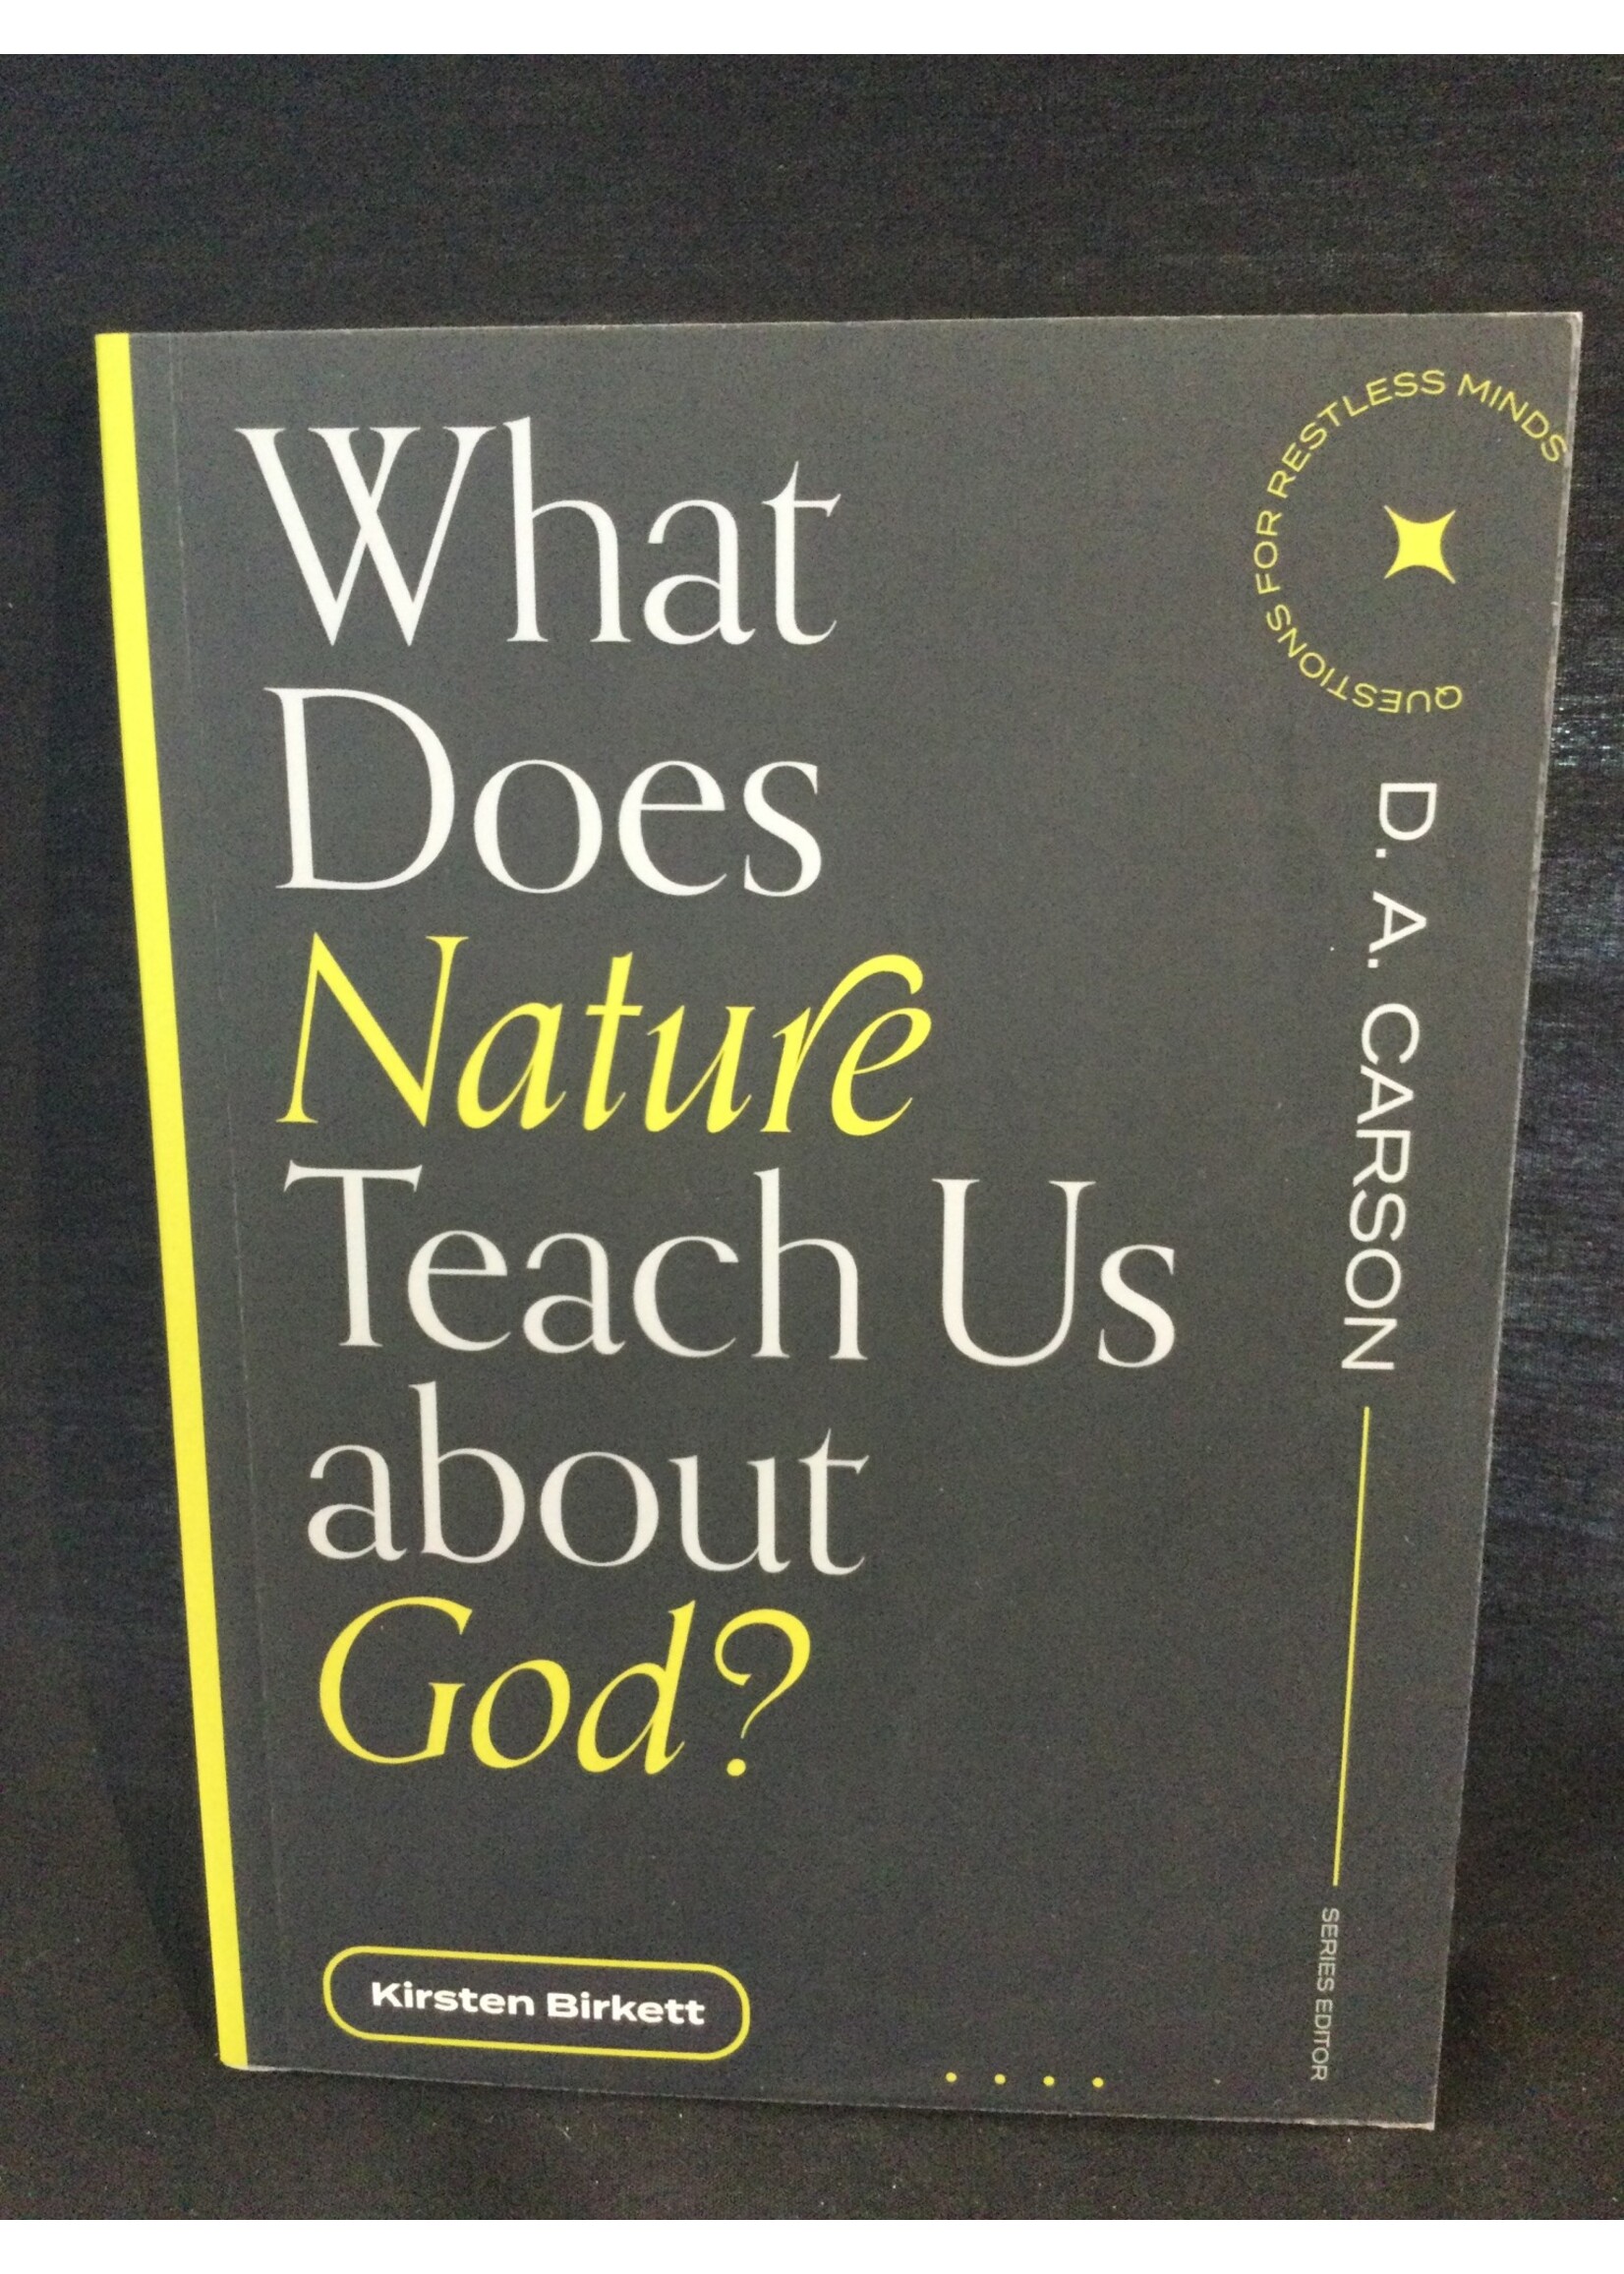 WHAT DOES NATURE TEACH US ABOUT GOD